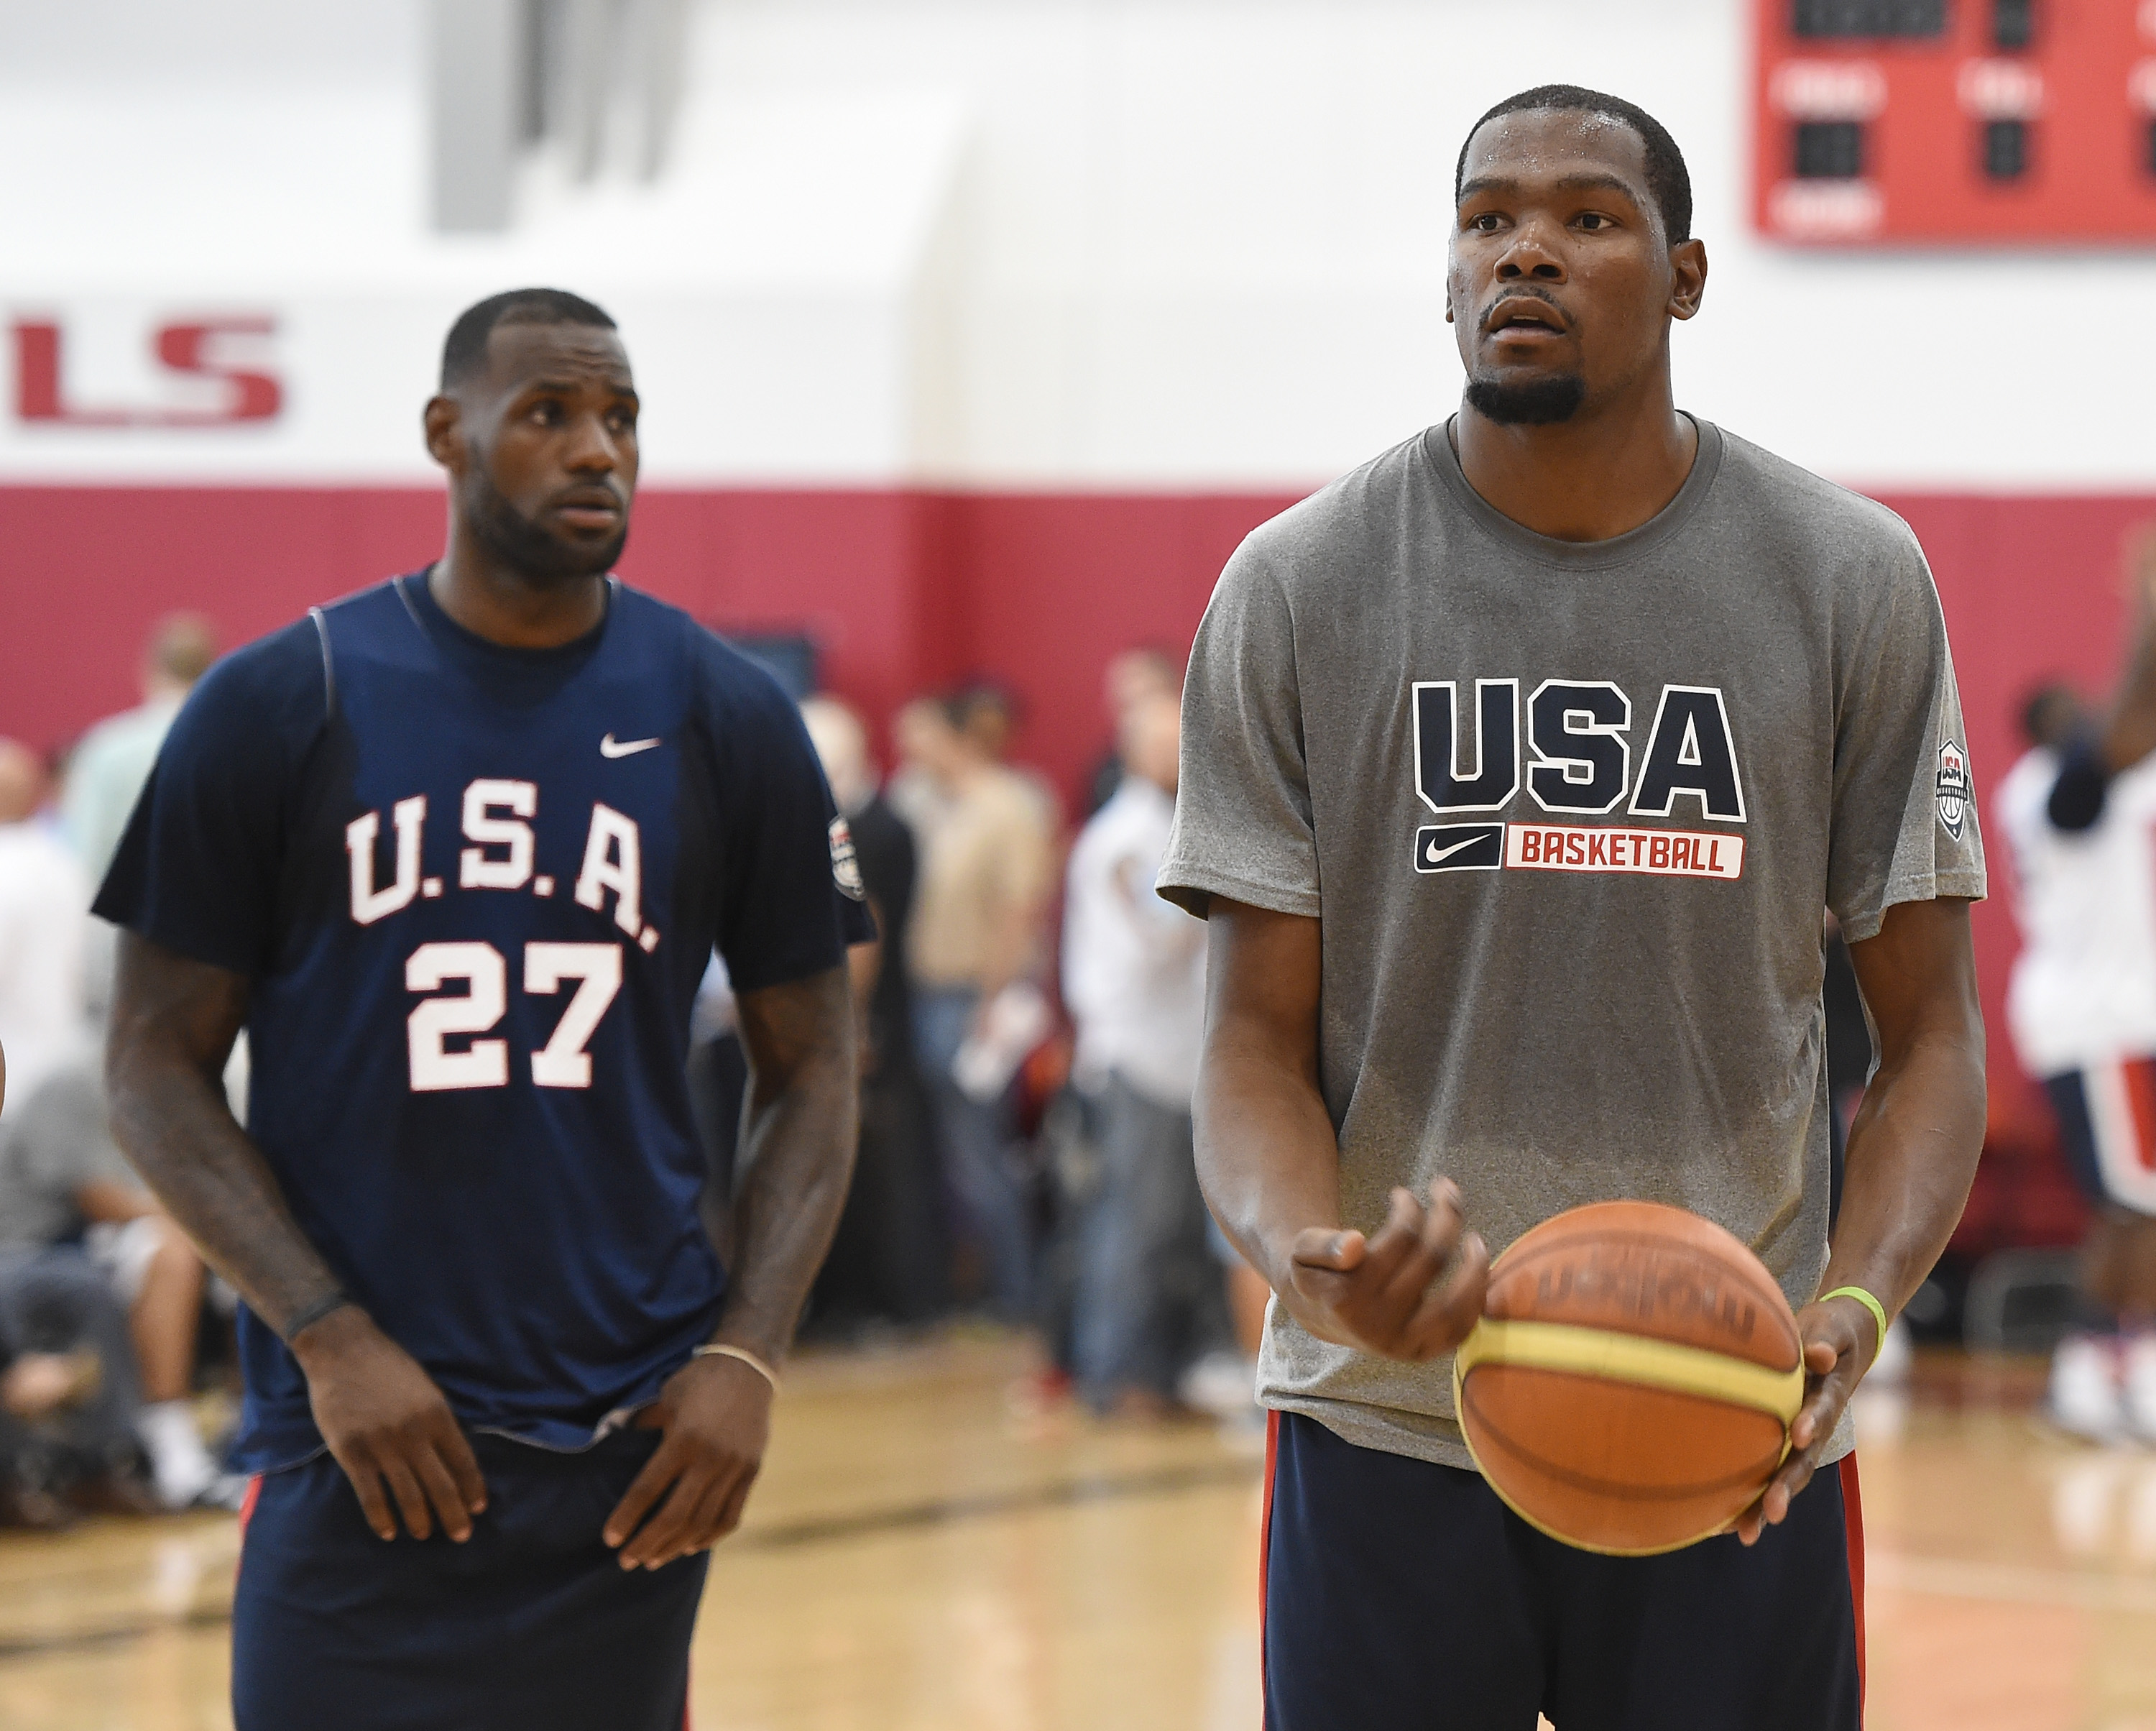 LAS VEGAS, NV - AUGUST 12: LeBron James #27 looks on as Kevin Durant #29 of the 2015 USA Basketball Men's National Team shoots a free throw during a practice session at the Mendenhall Center on August 12, 2015 in Las Vegas, Nevada.   Ethan Miller/Getty Images/AFP